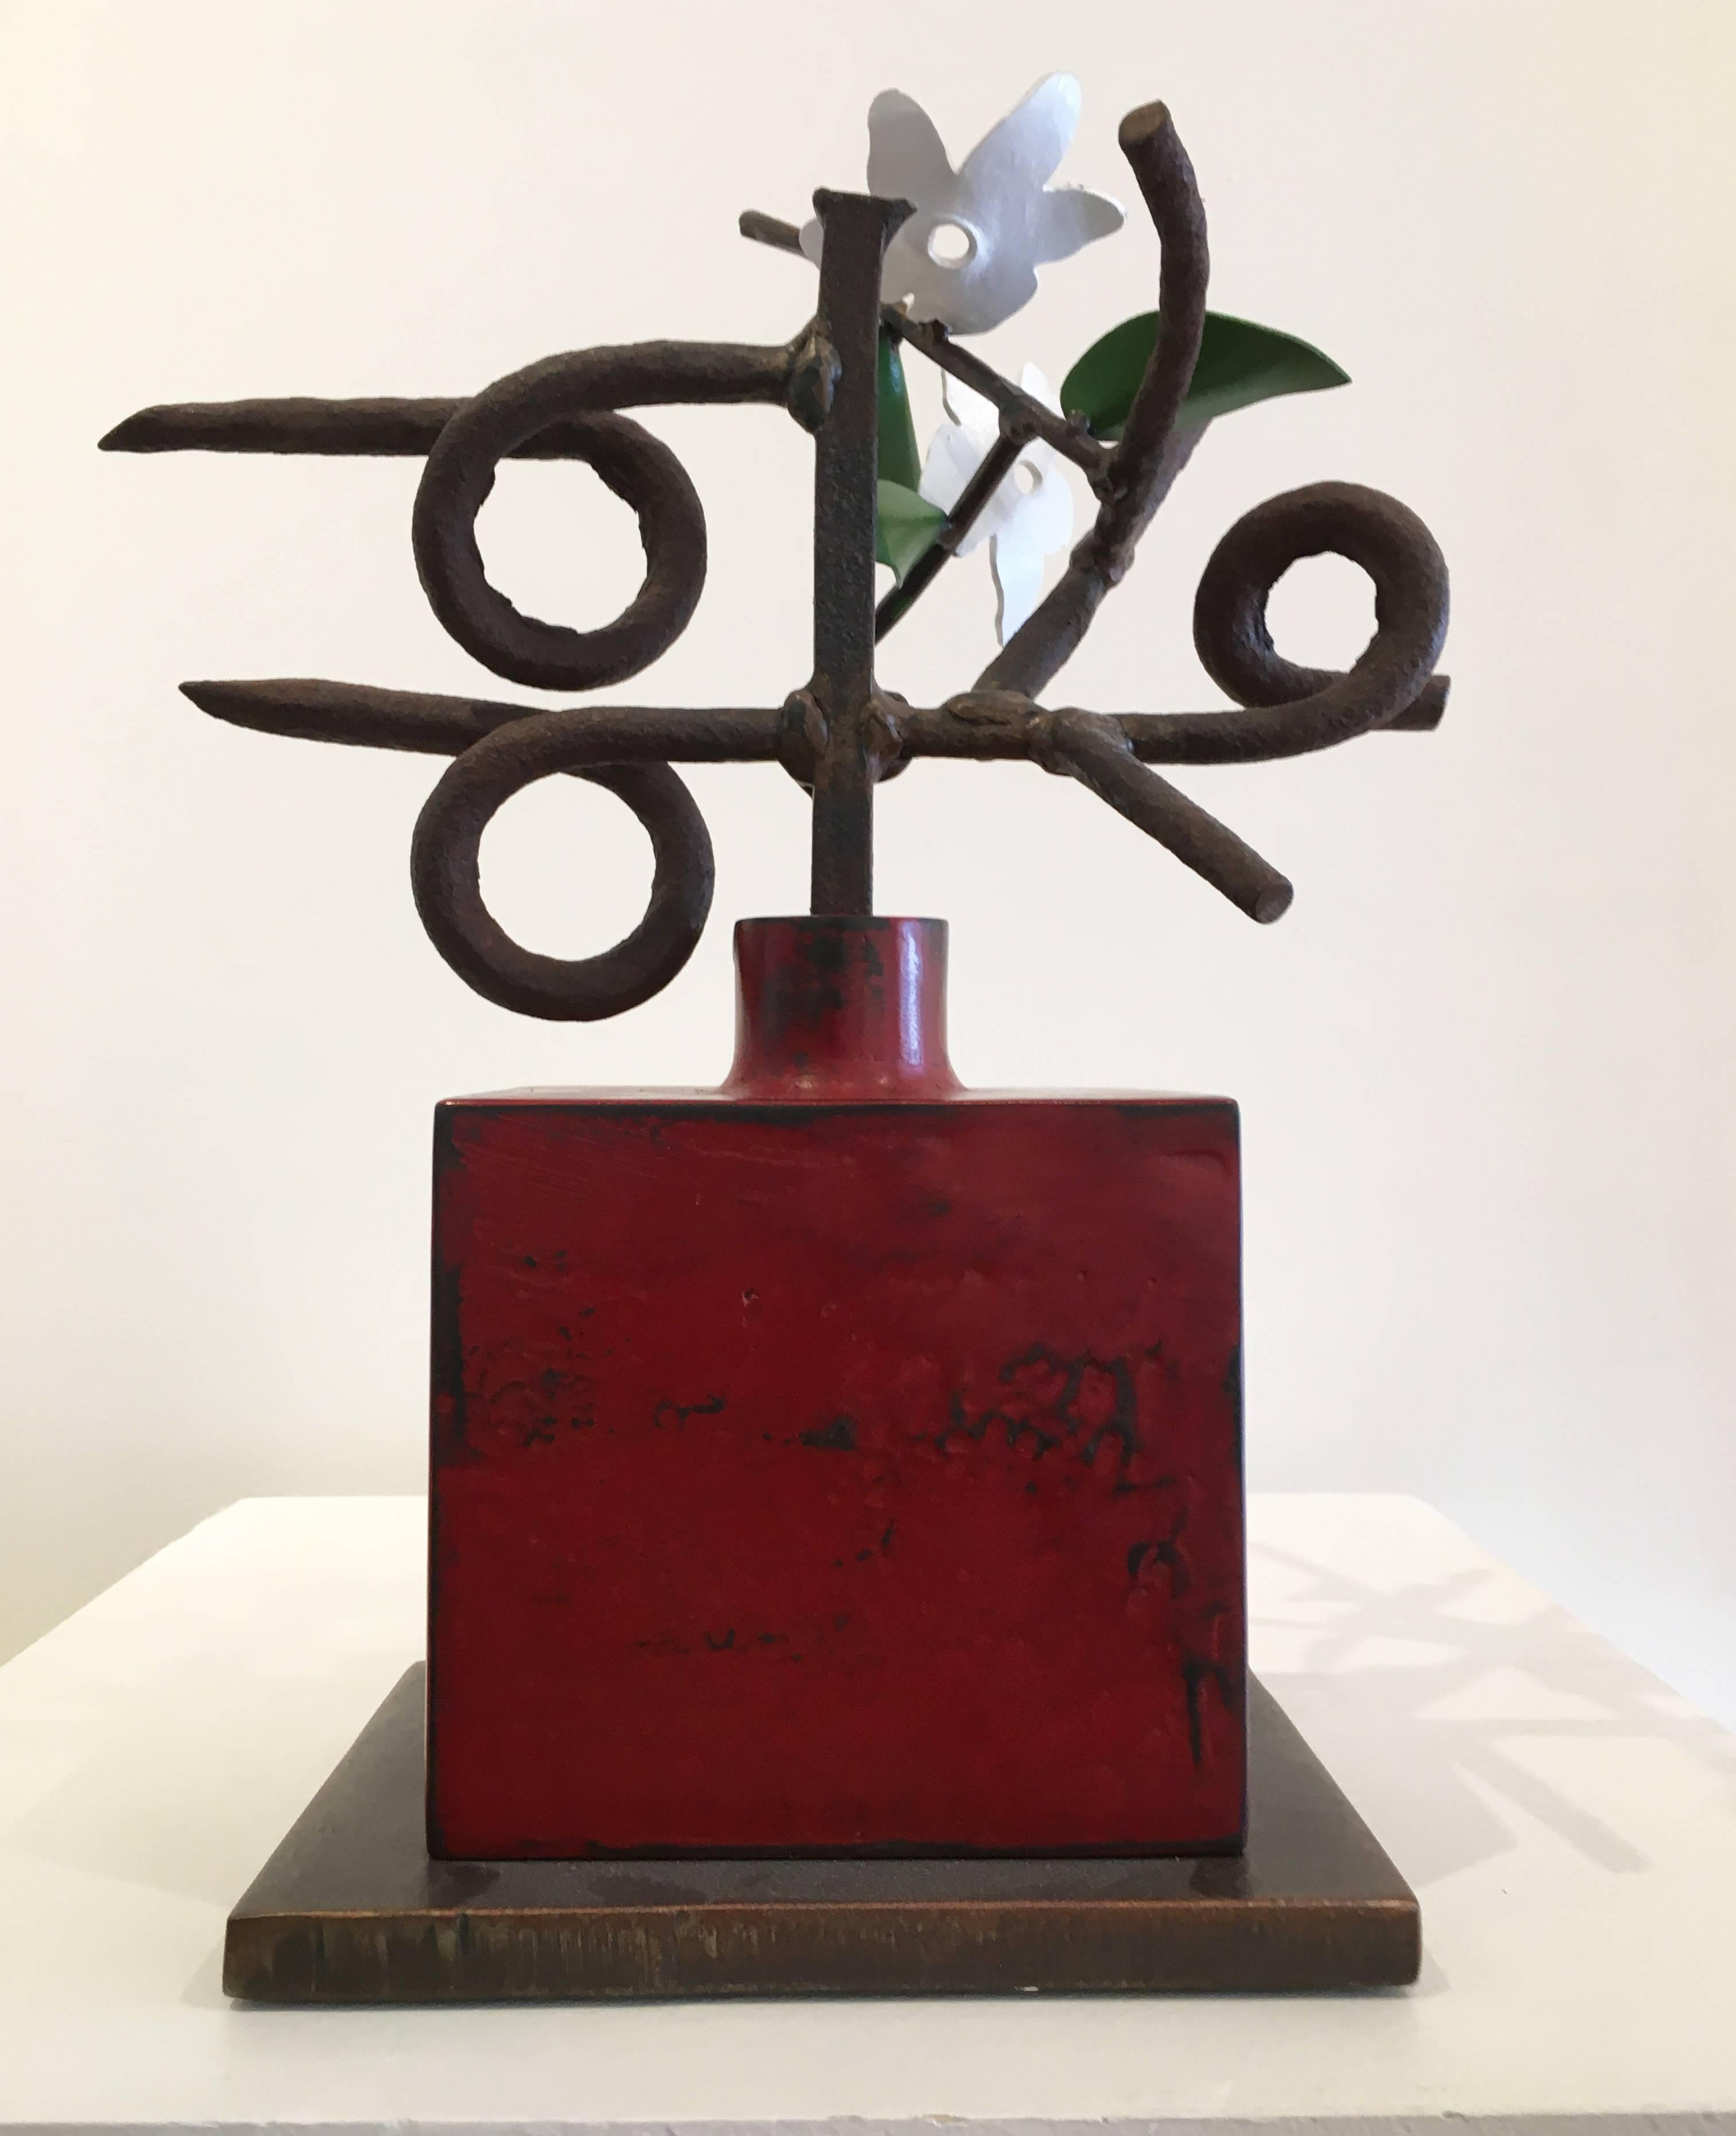 “Sanskrit” by David Kimball Anderson, 2012. Bronze, steel, and paint, 16 x 11.5 x 6 inches. This artwork features a square bronze vase in a rich red patina. Contained in the vase are two steel flowers painted in white with three green leaves. The